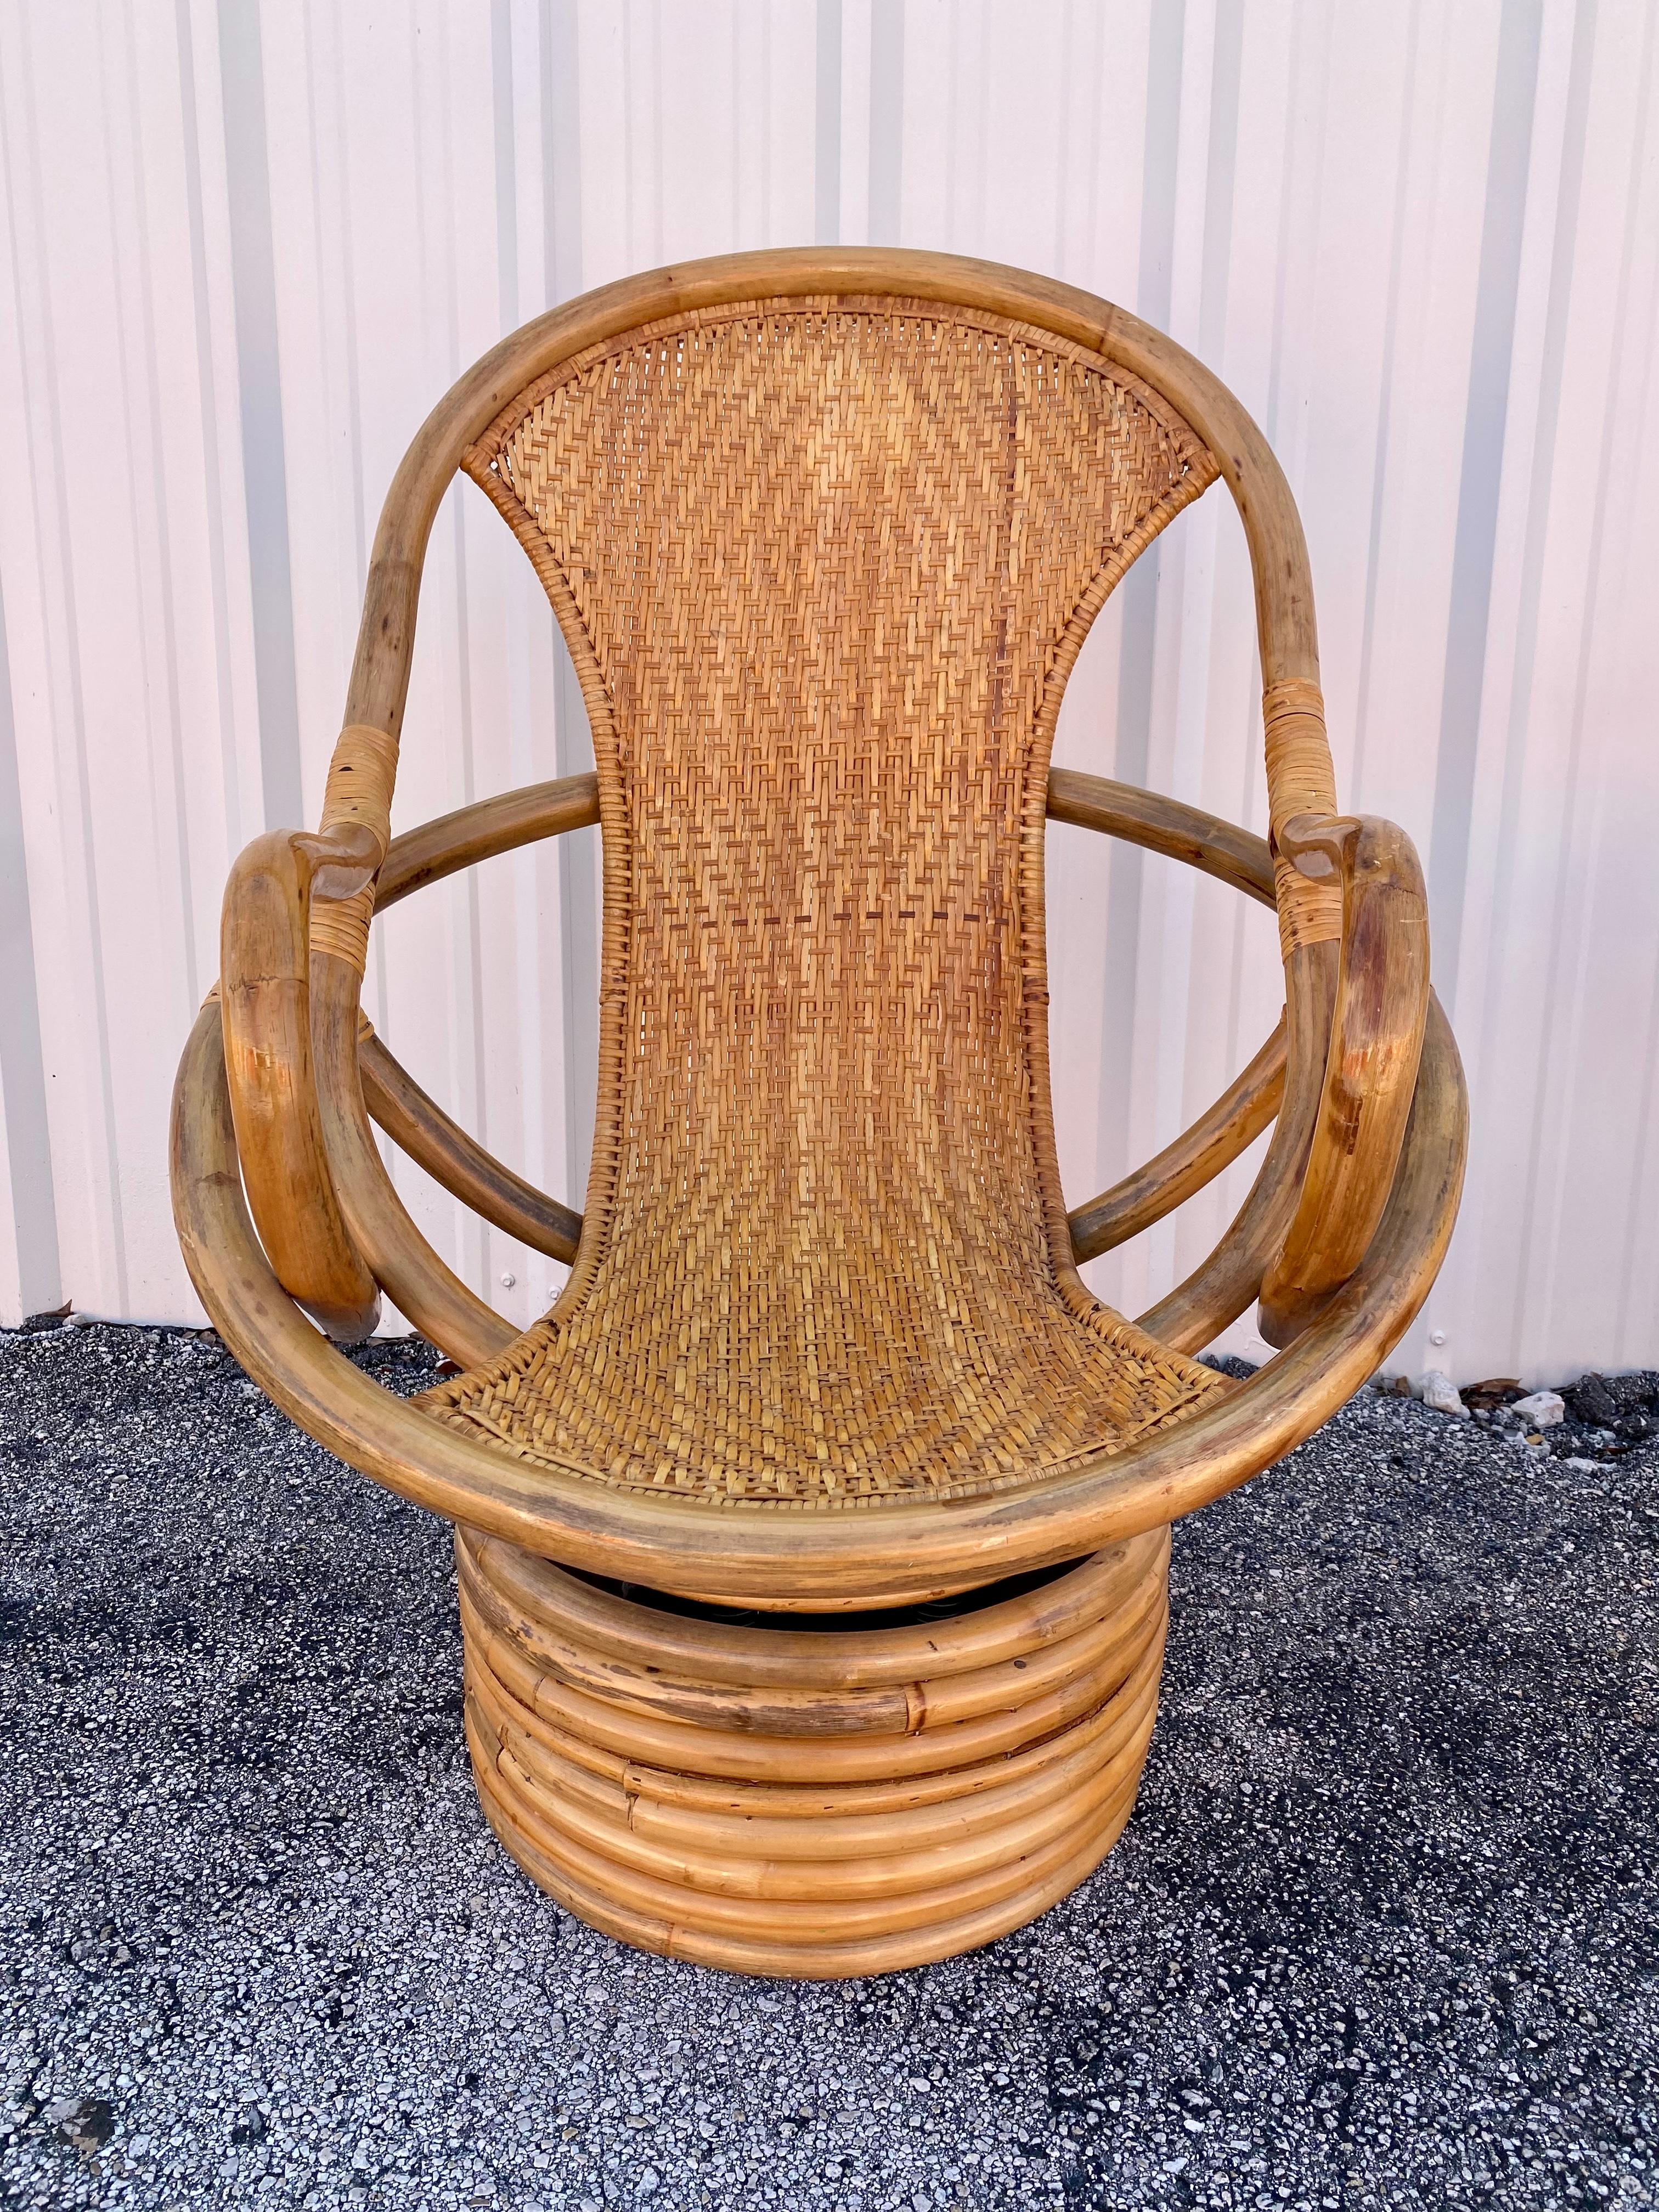 1980s Rattan Coastal Sculptural Swivel Chairs, set of 2 For Sale 7